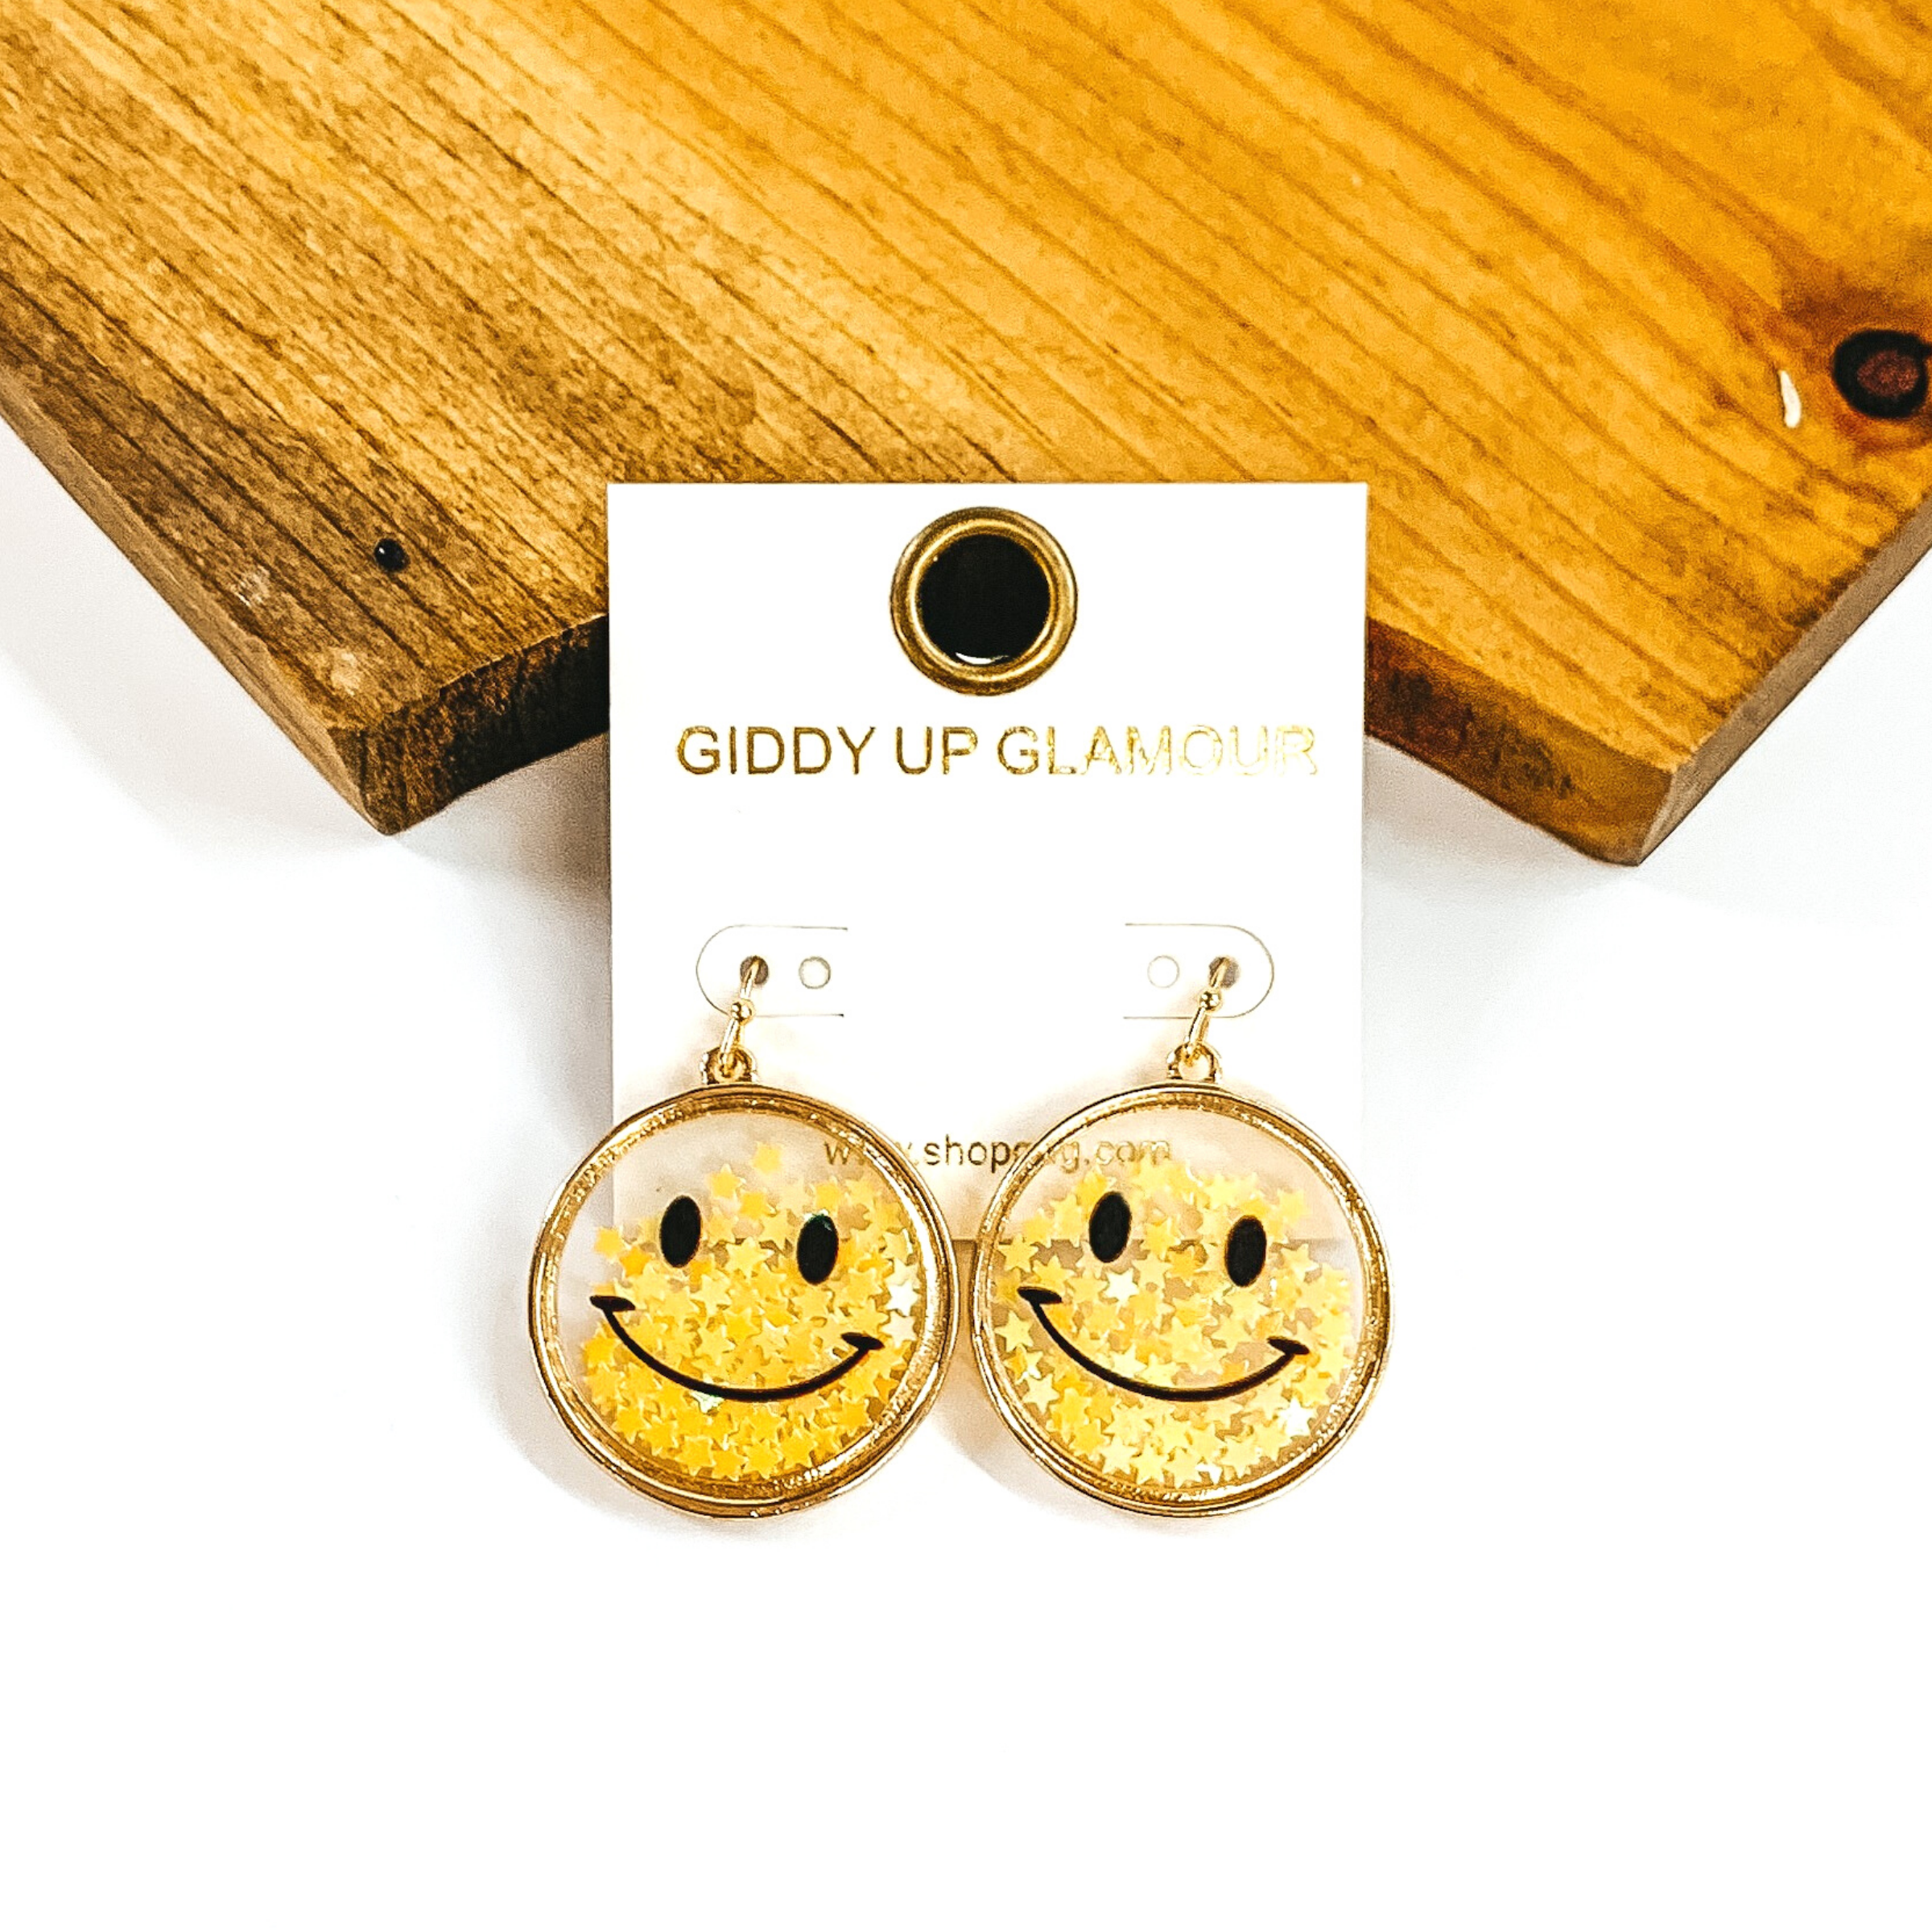 Hanging circle drop earrings with a smiley face. The circles are a small, clear shadow box with a gold outline. It is filled with tiny, yellow iridescent stars. these earrings are pictured in front of a dark piece of wood on a white background. 